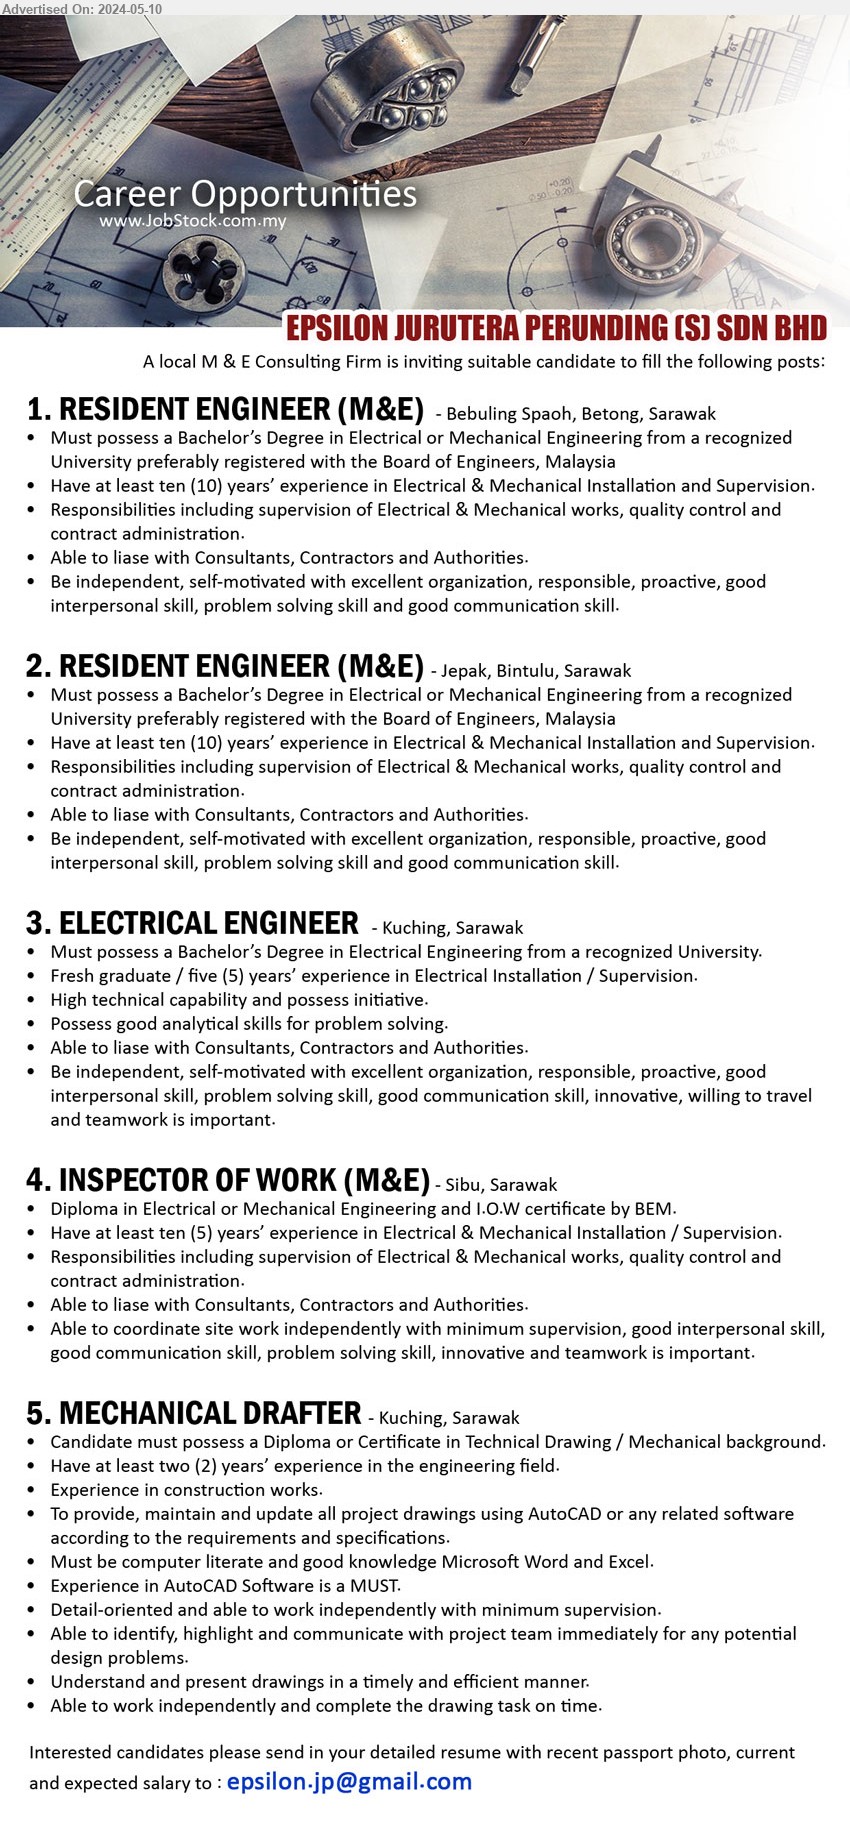 EPSILON JURUTERA PERUNDING (S) SDN BHD - 1. RESIDENT ENGINEER (M&E)  (Bebuling Spaoh, Betong), Bachelor’s Degree in Electrical or Mechanical Engineering, 10 yrs. exp.,...
2. RESIDENT ENGINEER (M&E) (Jepak, Bintulu), Bachelor’s Degree in Electrical or Mechanical Engineering, 10 yrs. exp.,...
3. ELECTRICAL ENGINEER (Kuching),  Bachelor’s Degree in Electrical Engineering, 5 yrs. exp.,...
4. INSPECTOR OF WORK (M&E) (Sibu), Diploma in Electrical or Mechanical Engineering and I.O.W certificate by BEM.,...
5. MECHANICAL DRAFTER  (Kuching), Diploma or Certificate in Technical Drawing / Mechanical background, 2 yrs. exp.,...
Email resume to ...